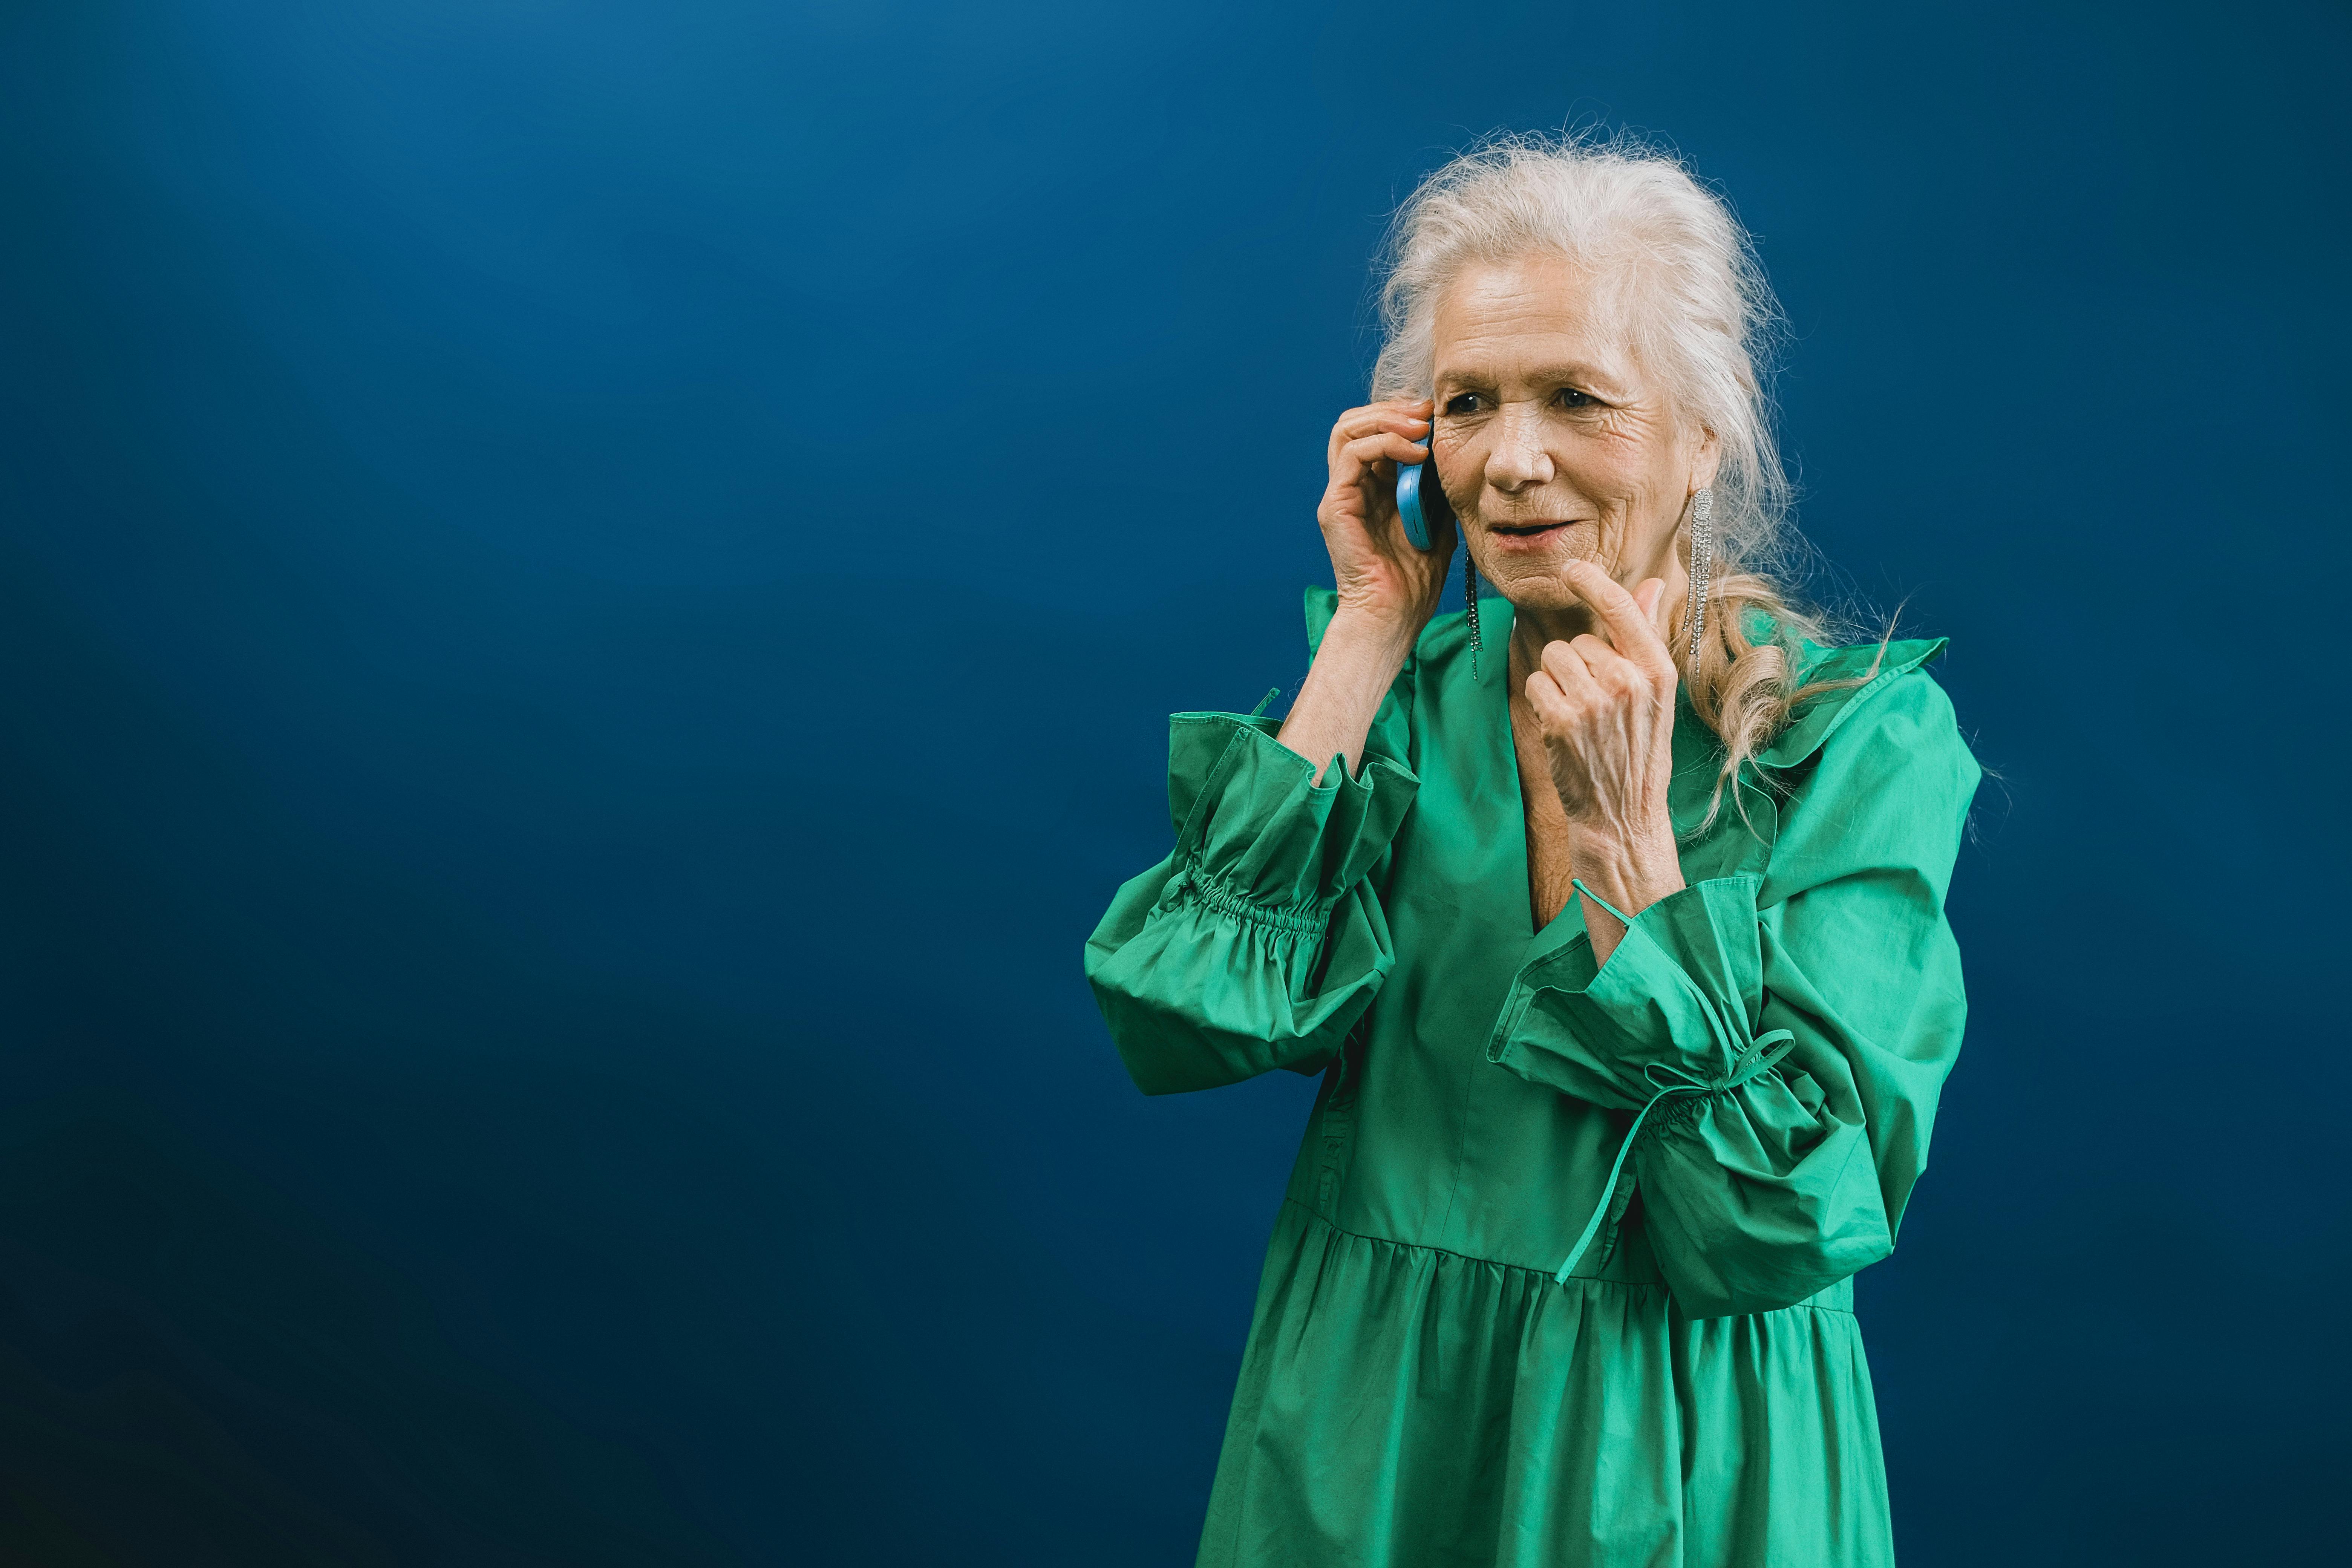 A smiling elderly woman on her phone | Source: Pexels